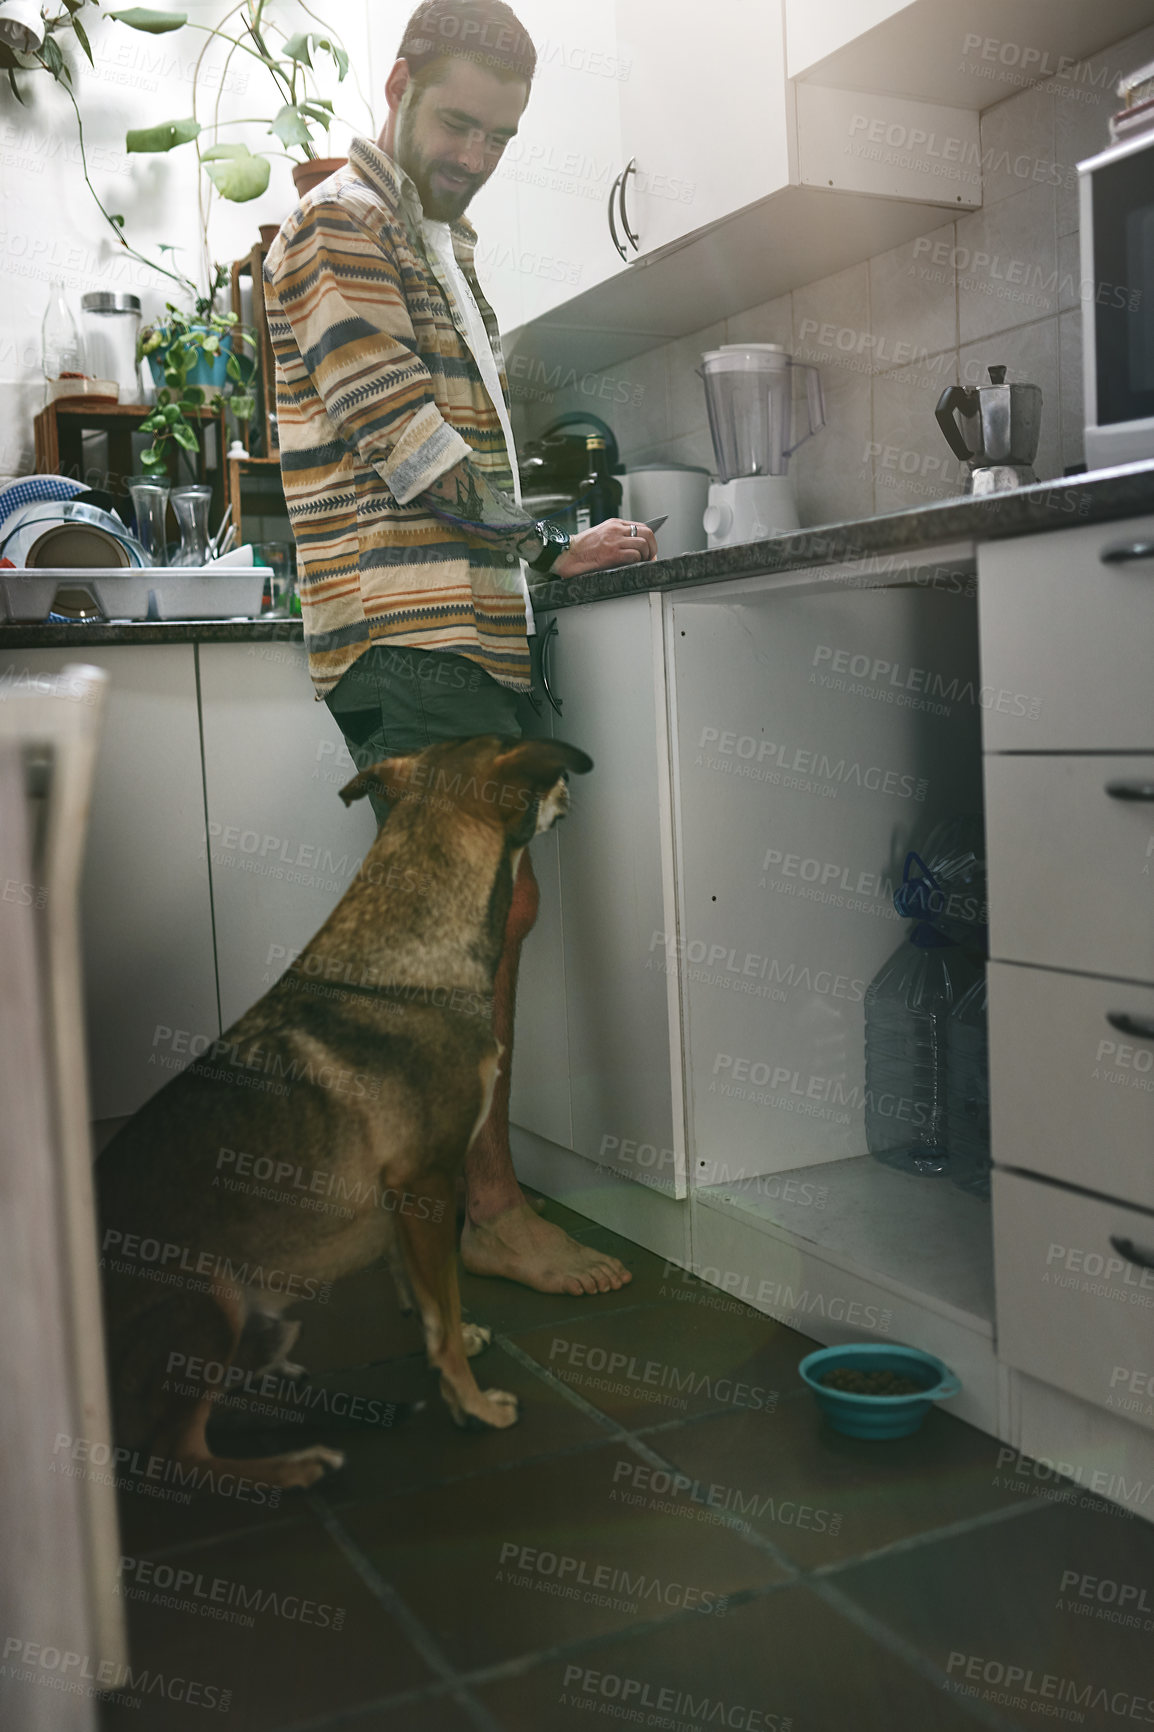 Buy stock photo Shot of a cheerful young man hanging out in the kitchen with his dog at home during the day